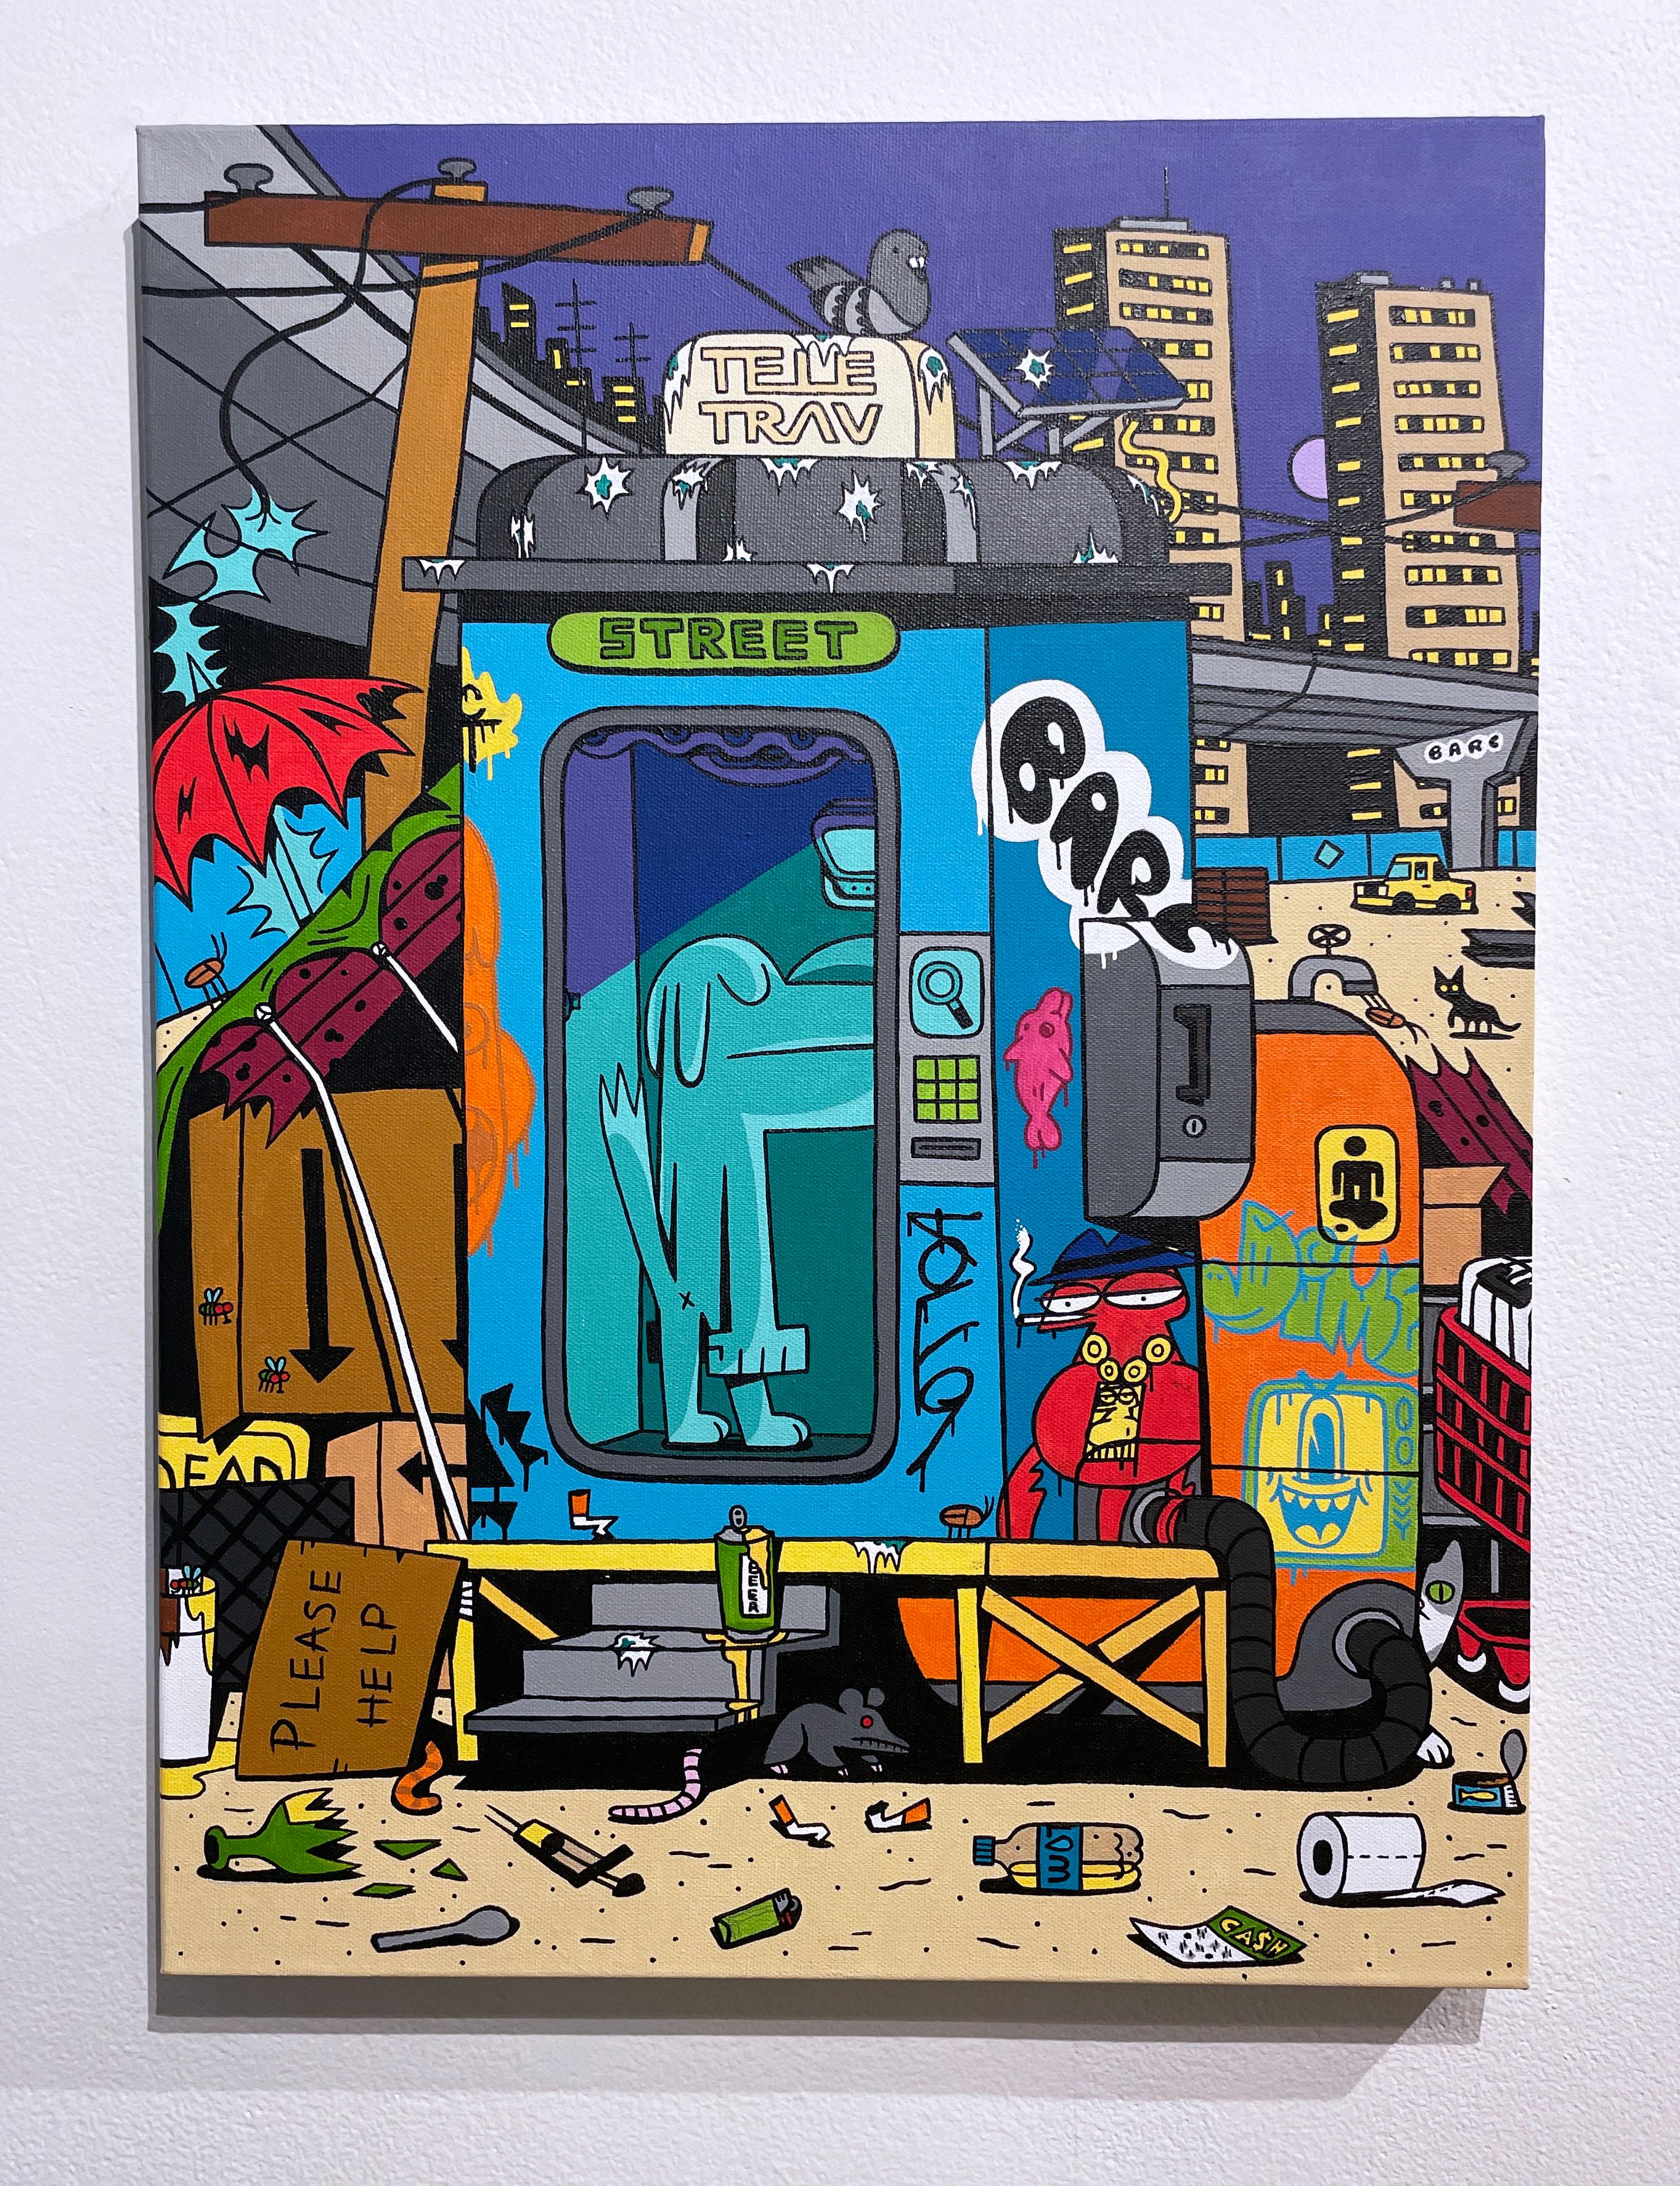 Tele-Trav (Deep) by BARC the dog (2022), pop art comic book style, acrylic on canvas, illustration, cartoon inspired character art, underwater scene, deep sea, ocean view, teleportation machine

Welcome to the world BARC the dog. In this vignette,